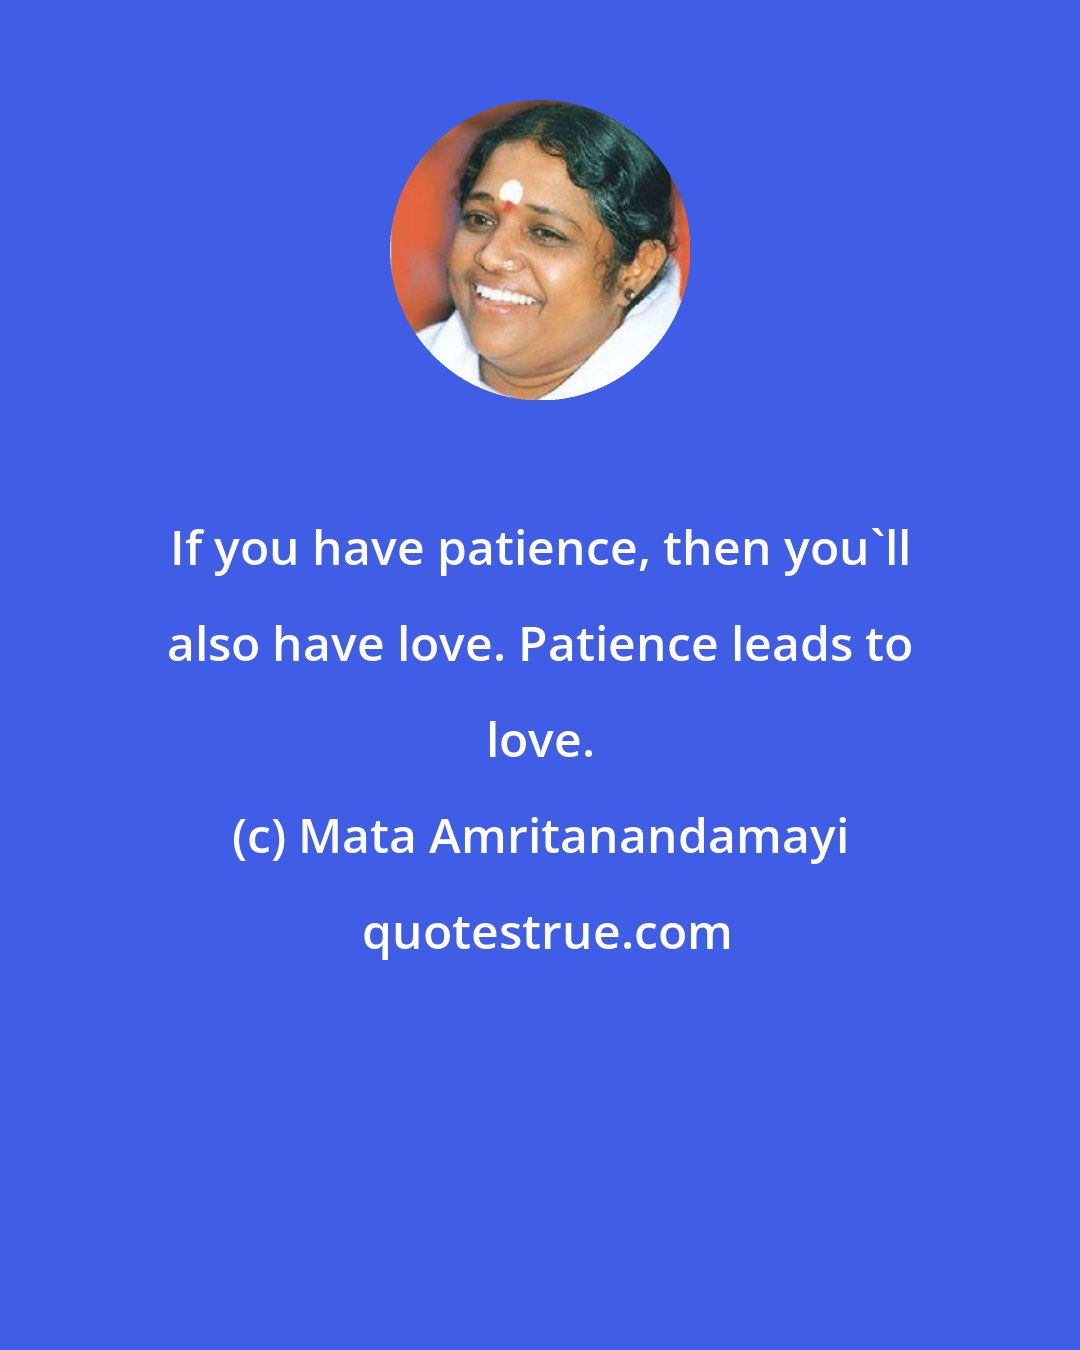 Mata Amritanandamayi: If you have patience, then you'll also have love. Patience leads to love.